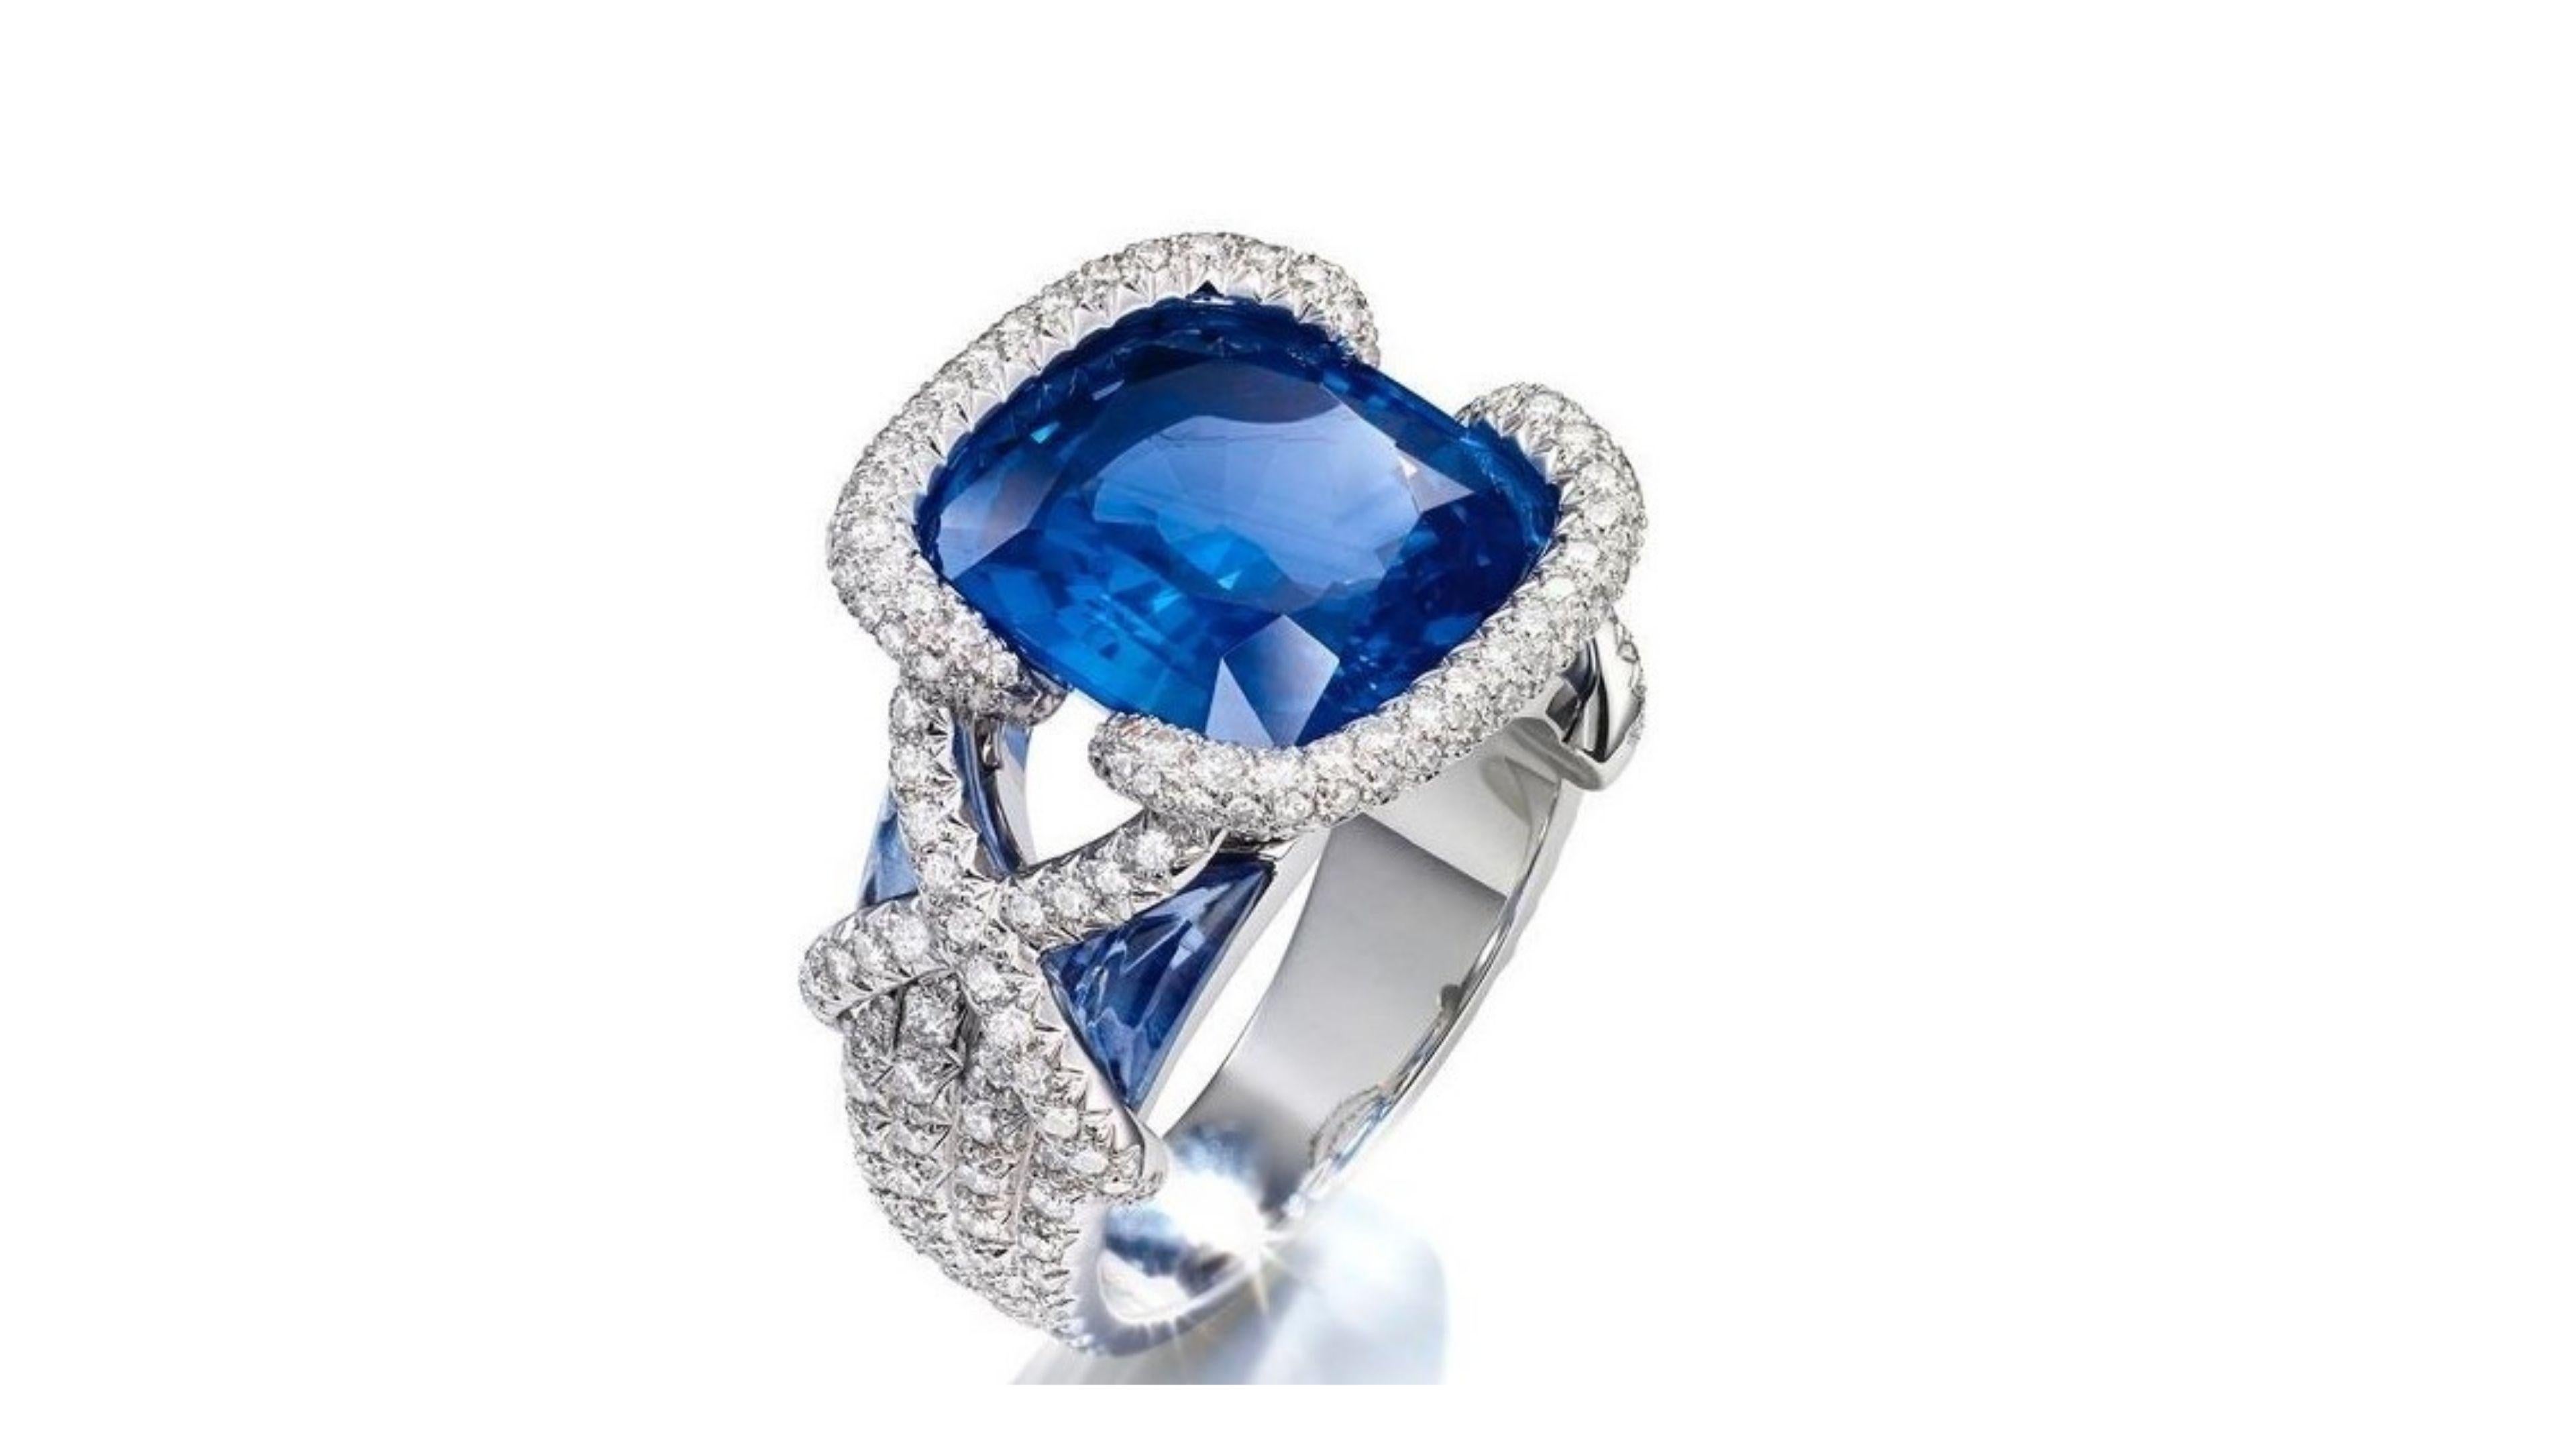 
6.48 Carat Tanzanite Ring in this unique design with 128 White Diamonds at 1.28 Carat making really stand out. Set in 18 Karat White Gold

 We have other tanzanite rings  too and you can have any custom made too